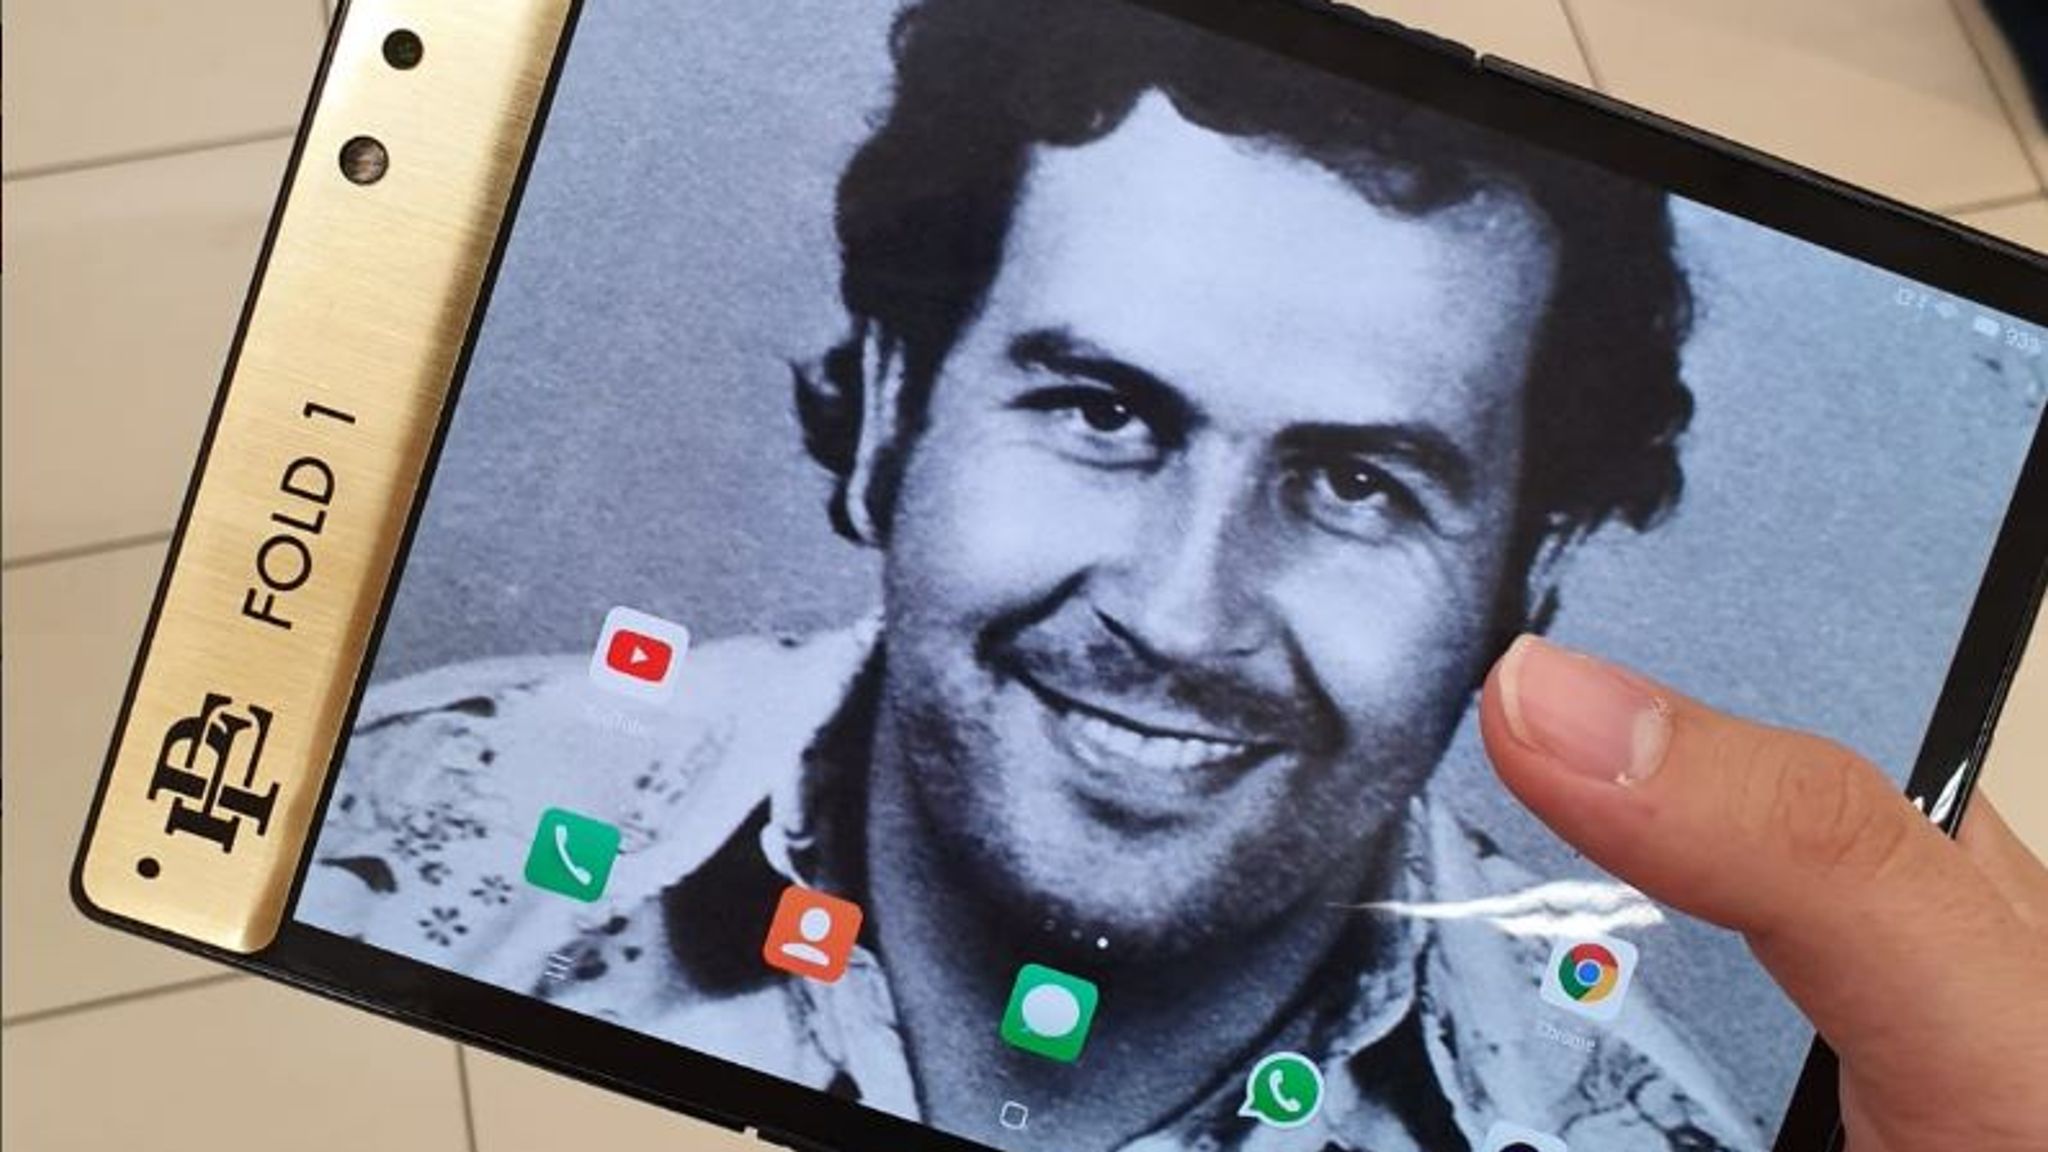 Pablo Escobar's brother launches 'unbreakable' gold smartphone - and vows to sue | Science & Tech News | News